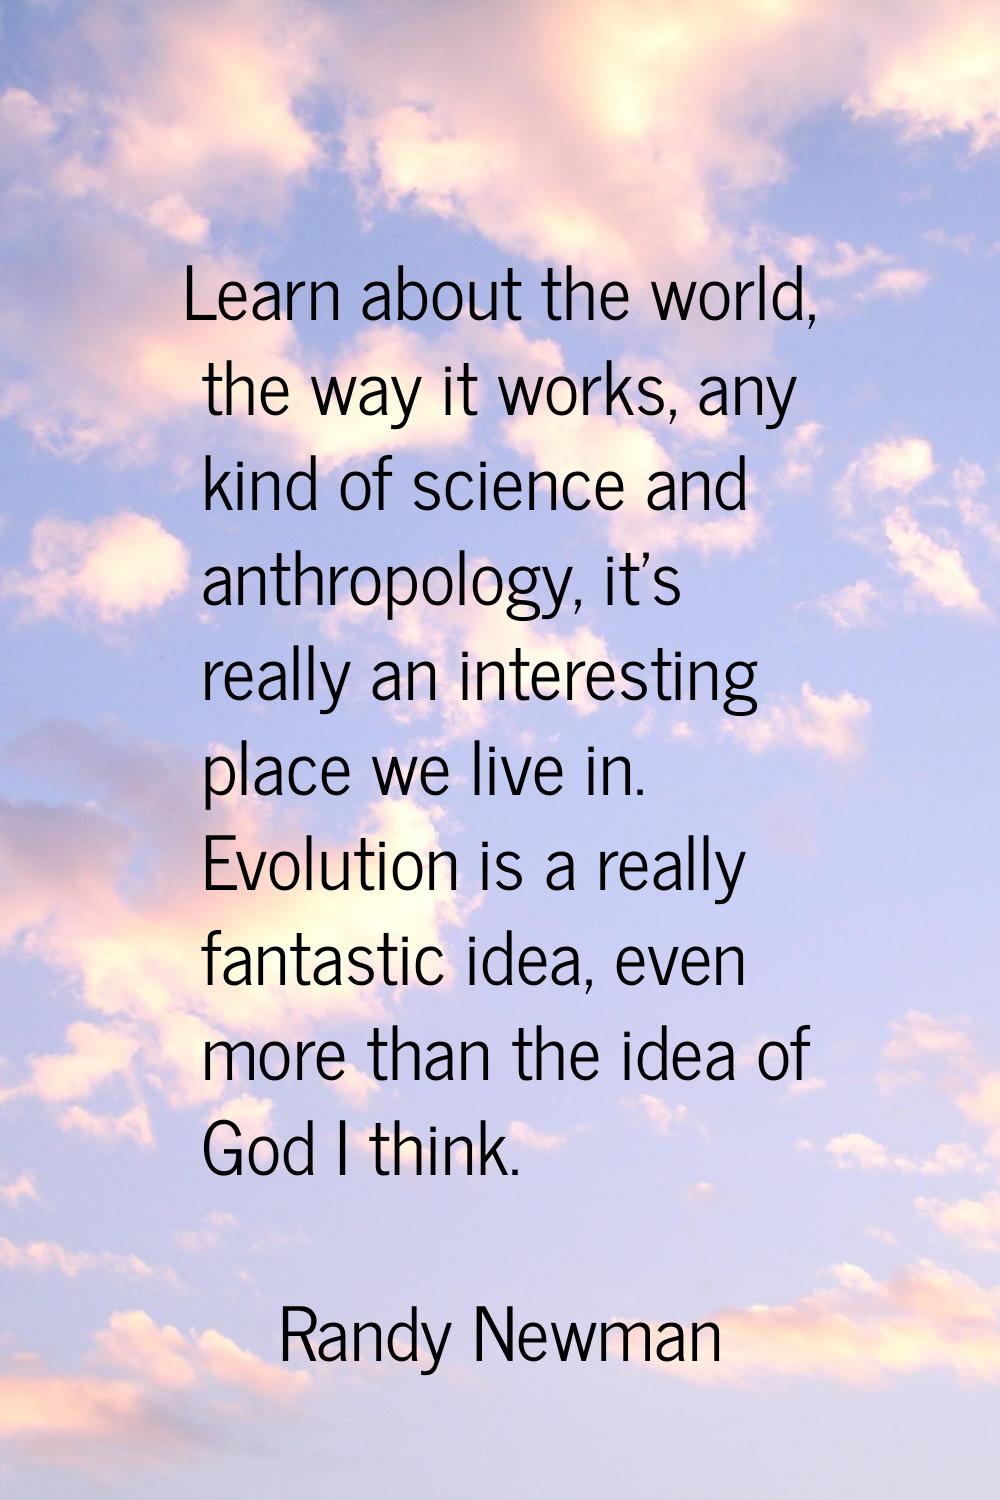 Learn about the world, the way it works, any kind of science and anthropology, it's really an inter